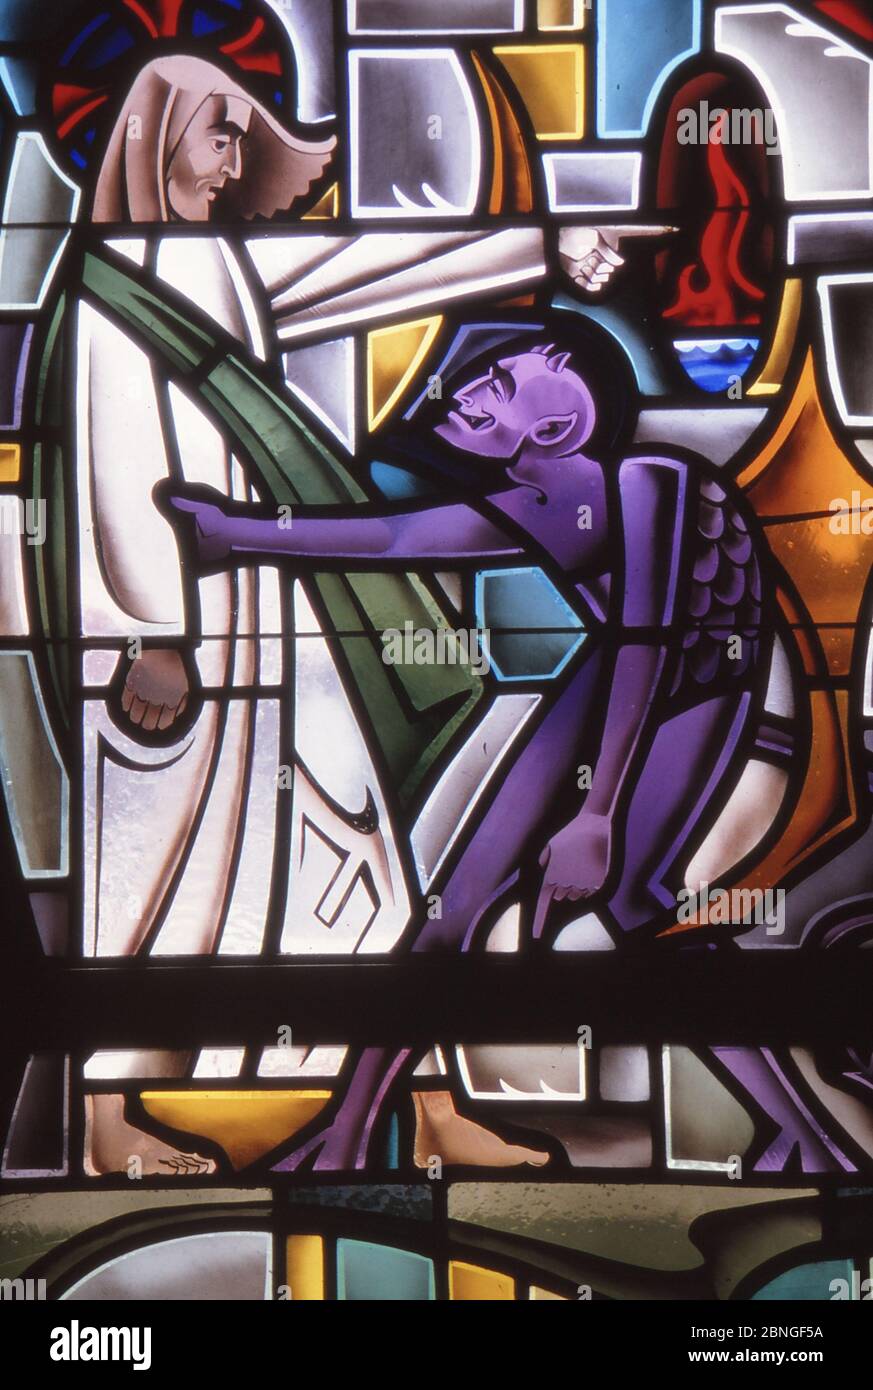 LOS ANGELES, UNITED STATES - Jun 17, 1985: Stained Glass depiction of Devil tempting Jesus in the desert. Stock Photo